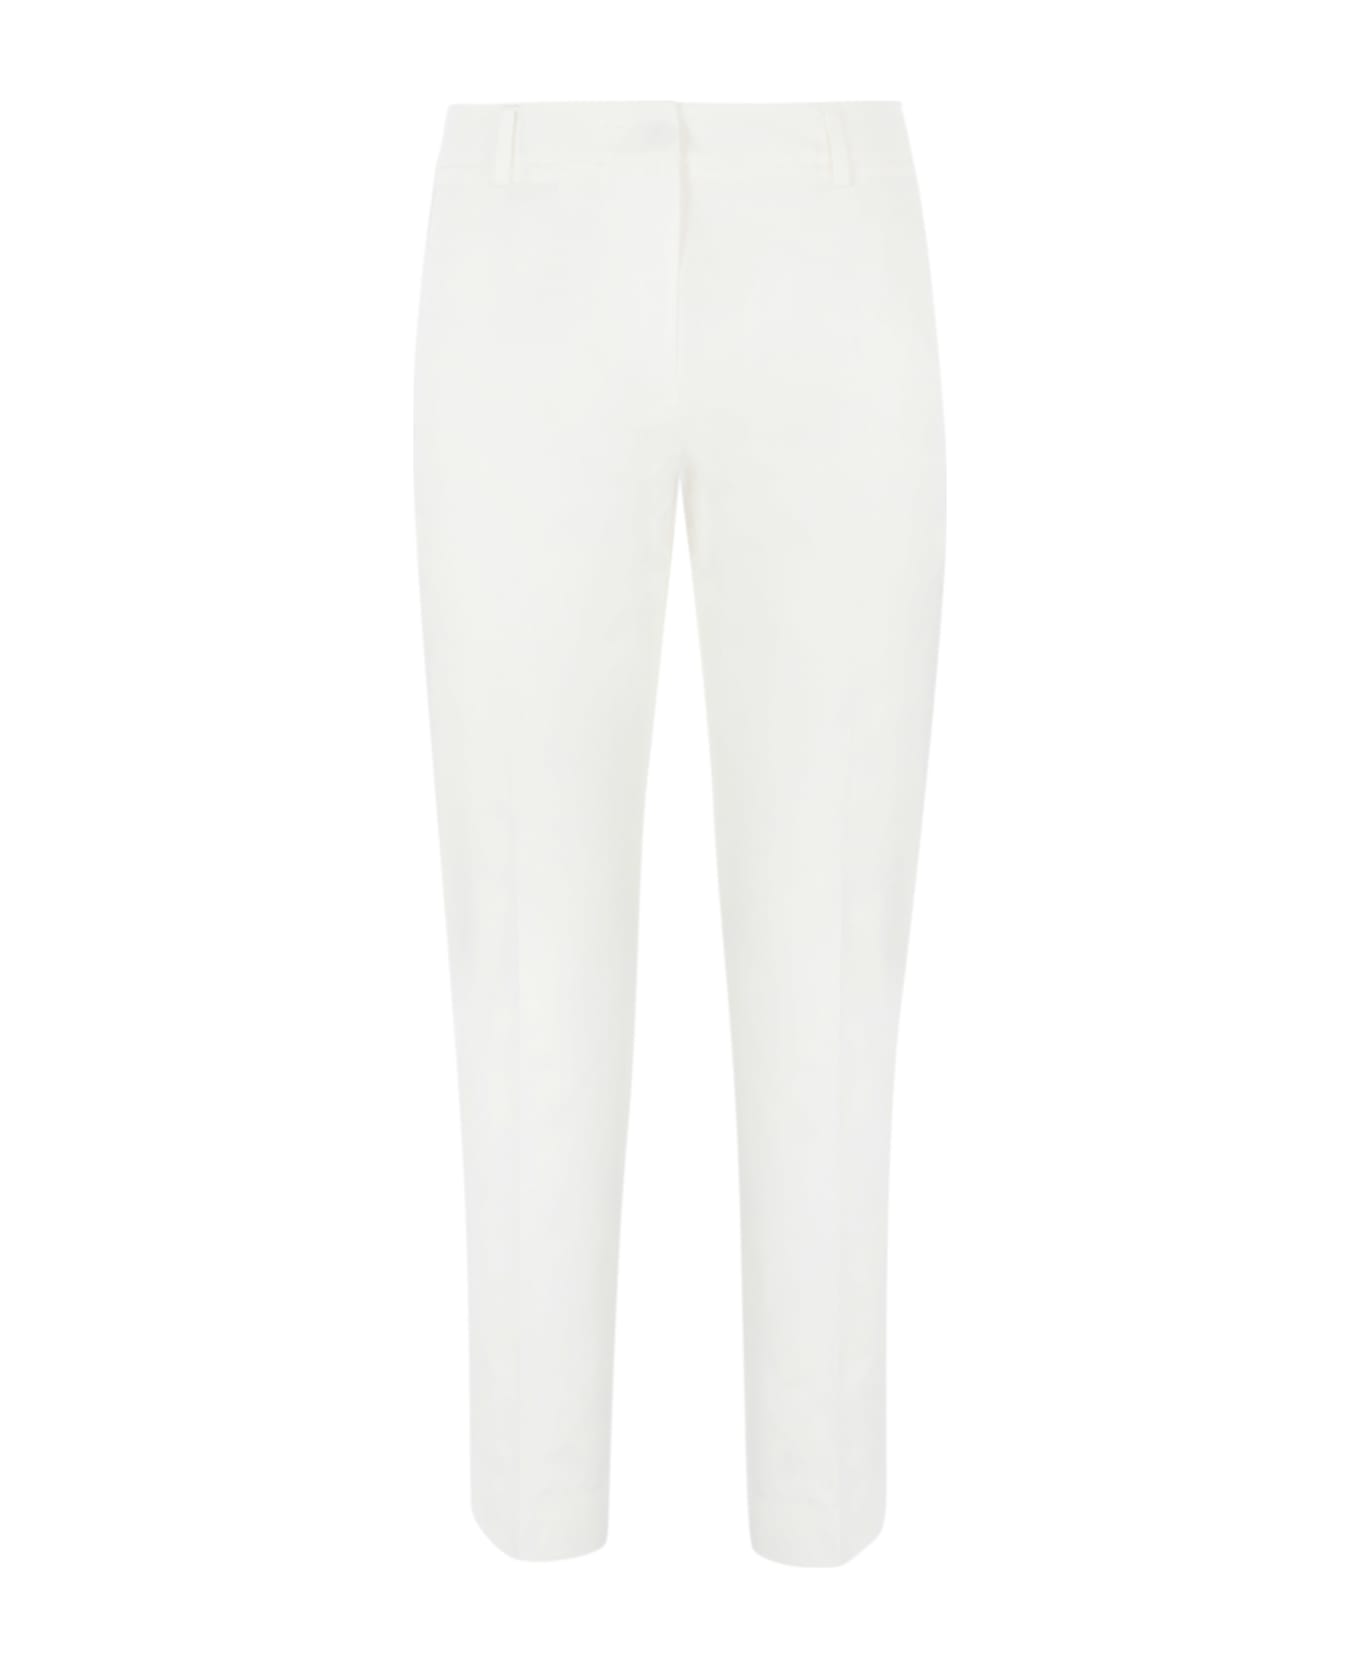 Weekend Max Mara 'cecco' Stretch Cotton Trousers - BIANCO ボトムス